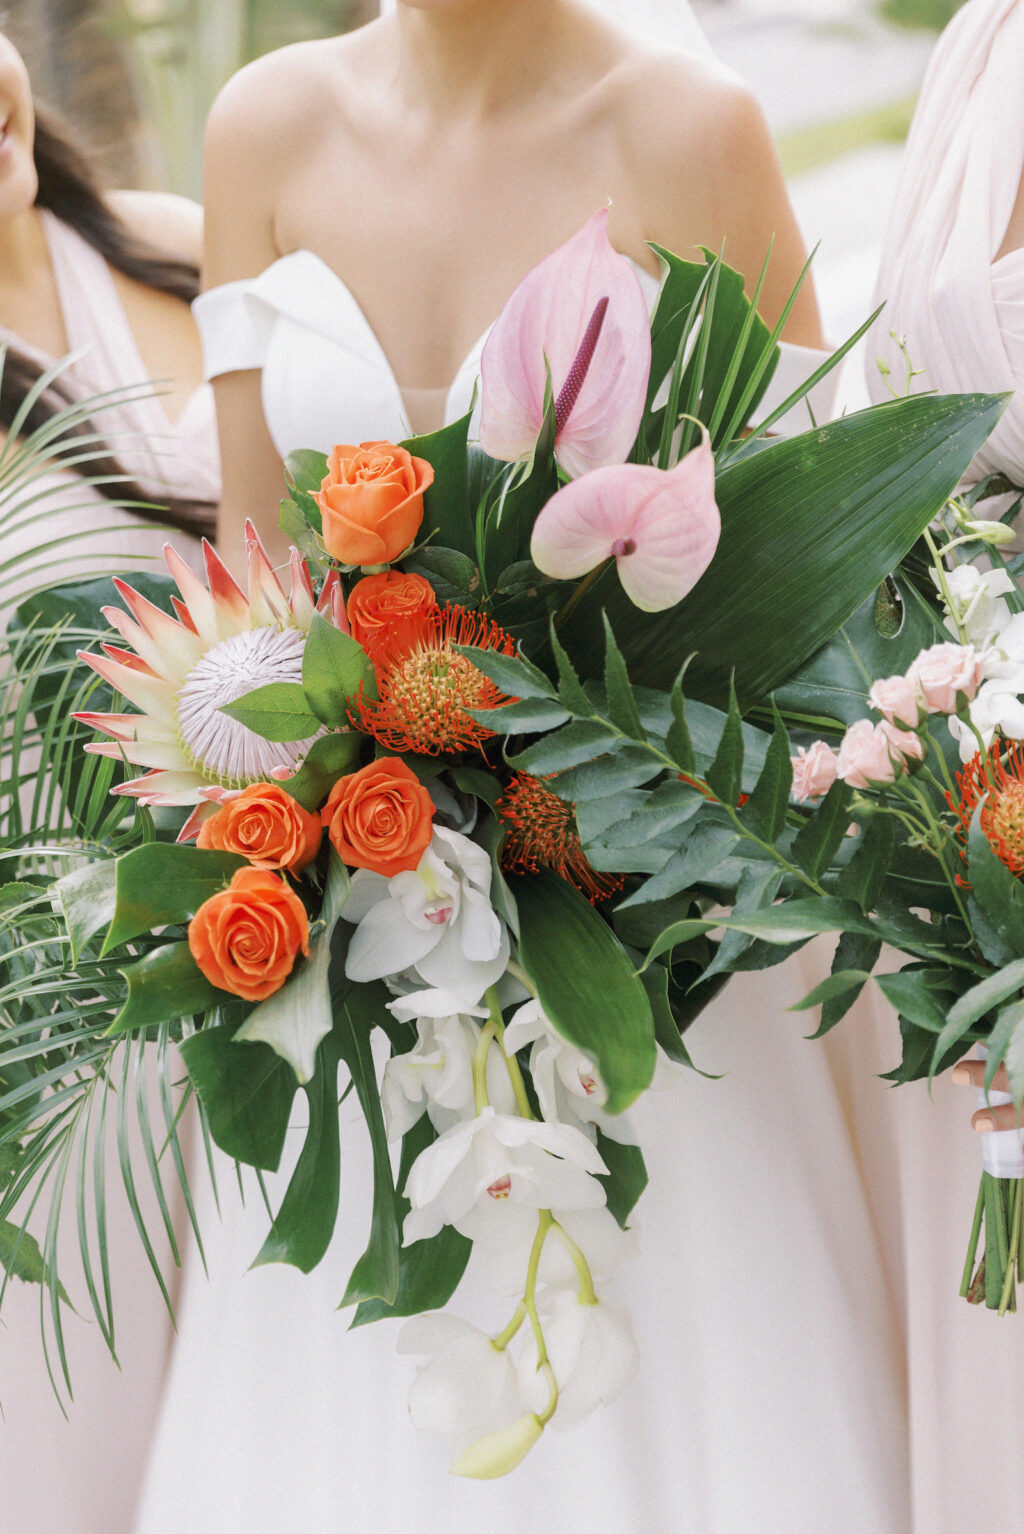 Bride holding Tropical Floral Bouquet, King Protea, Coral Orange Roses, Orange Pin Cushion Protea, Monstera and Palm Fronds, Hanging White Orchids, Pink Anthurium | Tampa Bay Wedding Planner Coastal Coordinating | Lemon Drops Floral